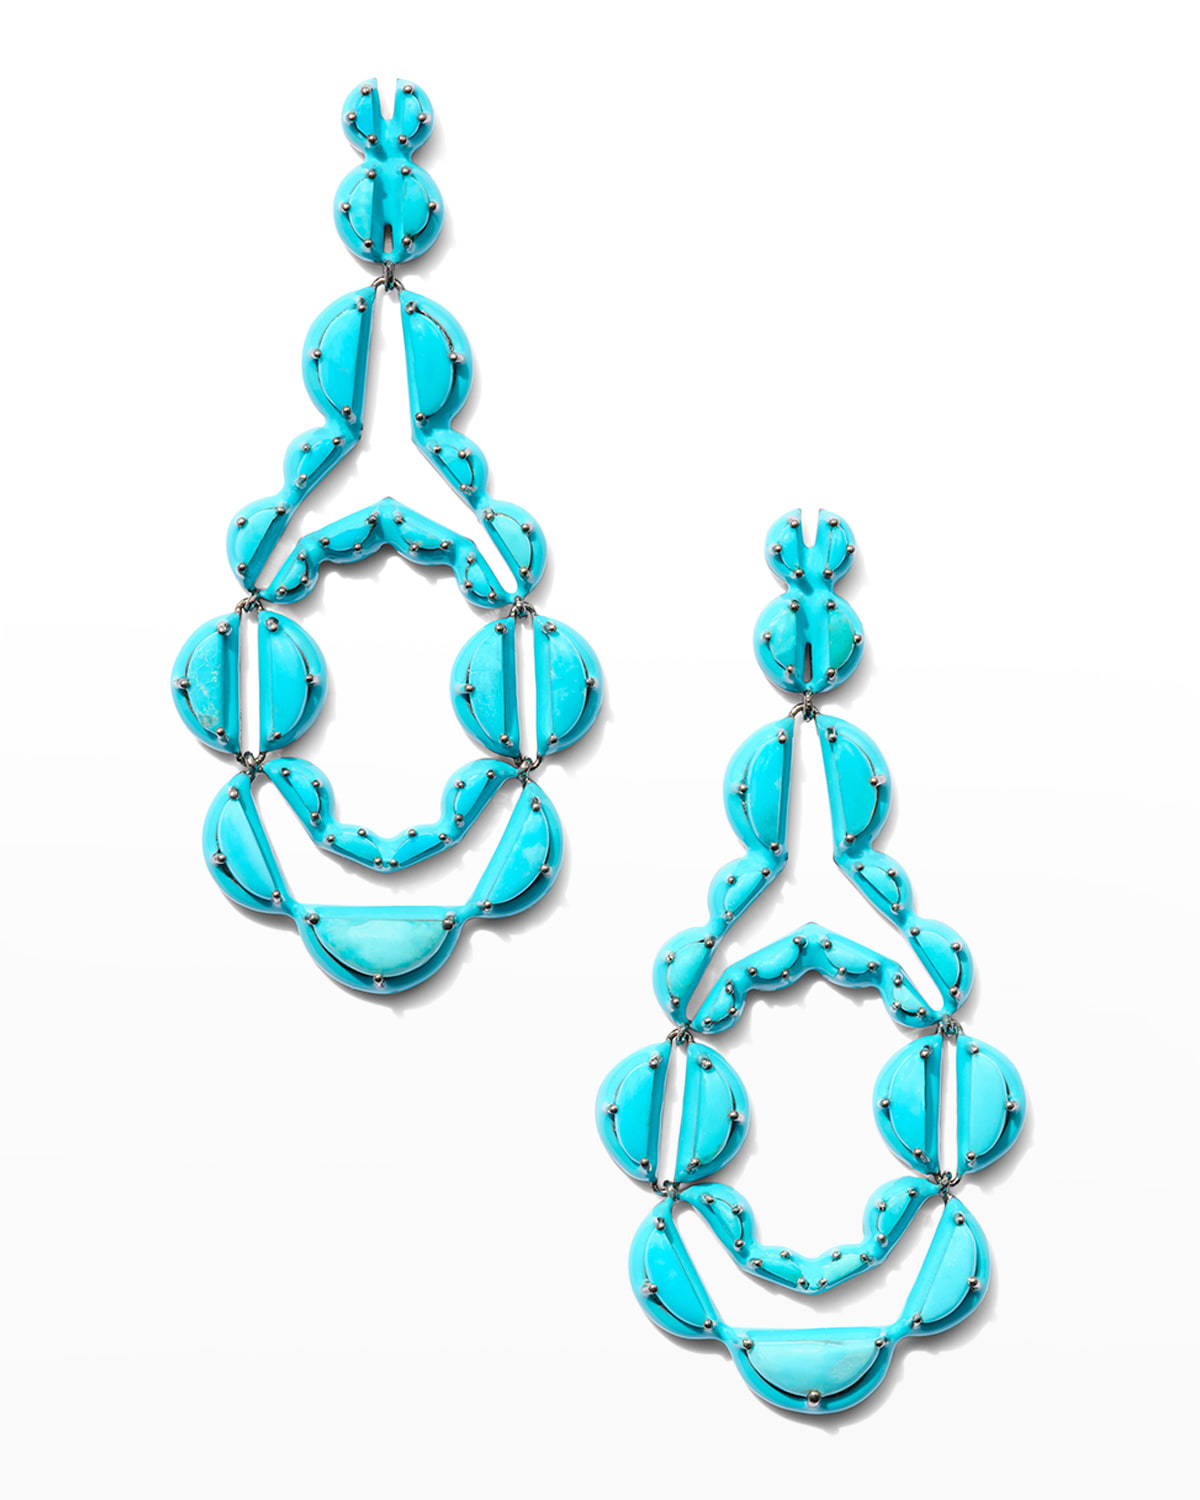 Vienna Earrings in Turquoise